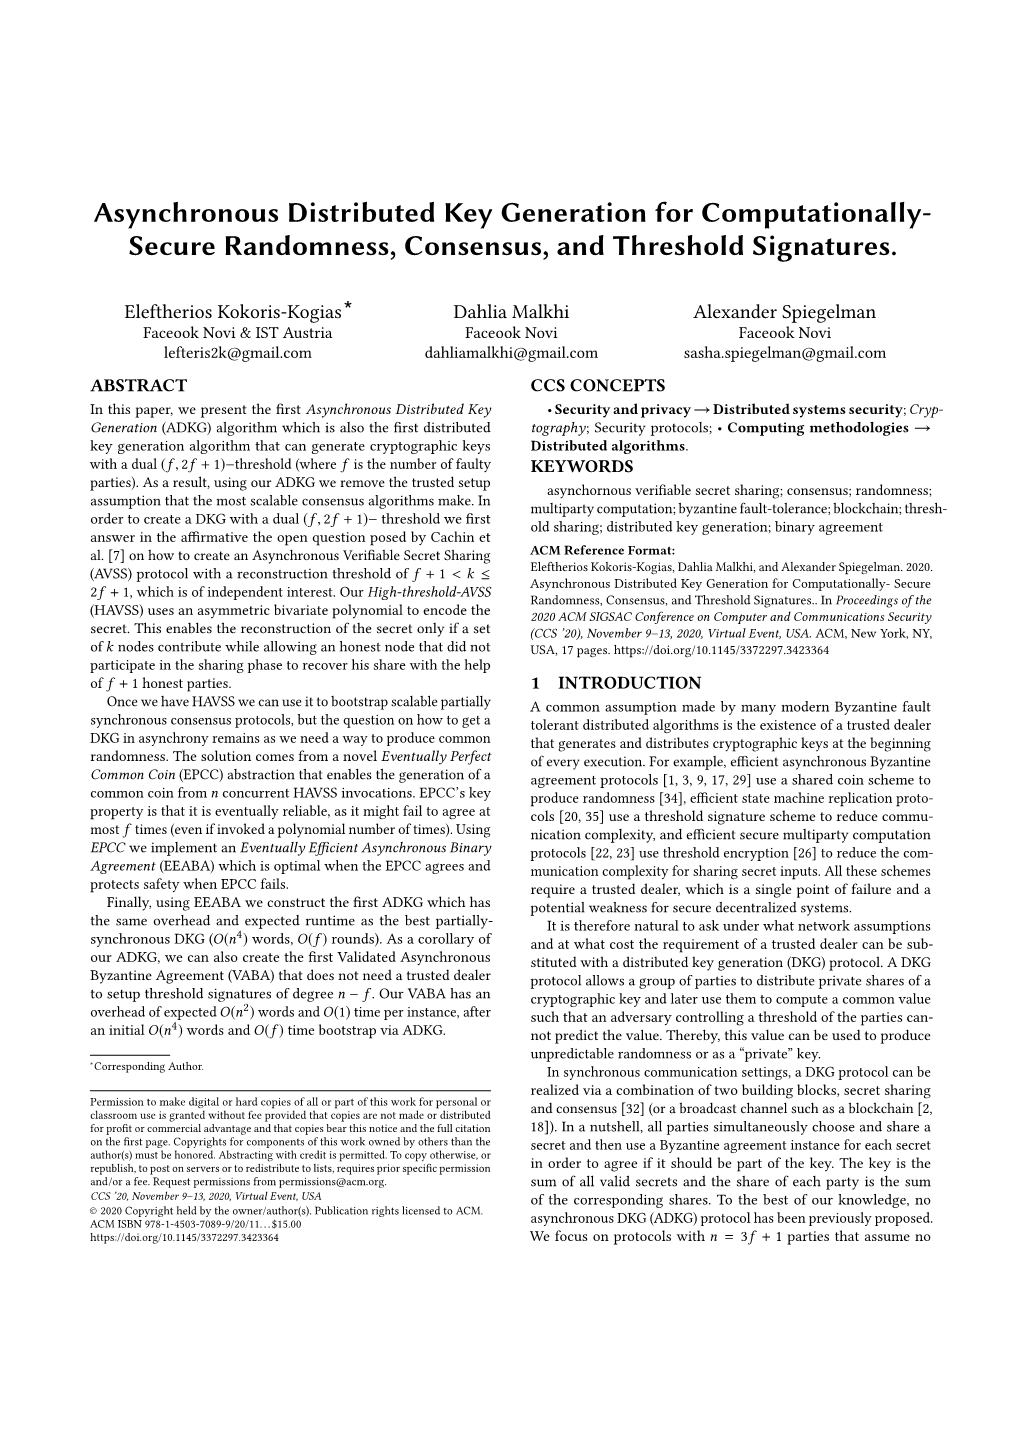 Asynchronous Distributed Key Generation for Computationally- Secure Randomness, Consensus, and Threshold Signatures